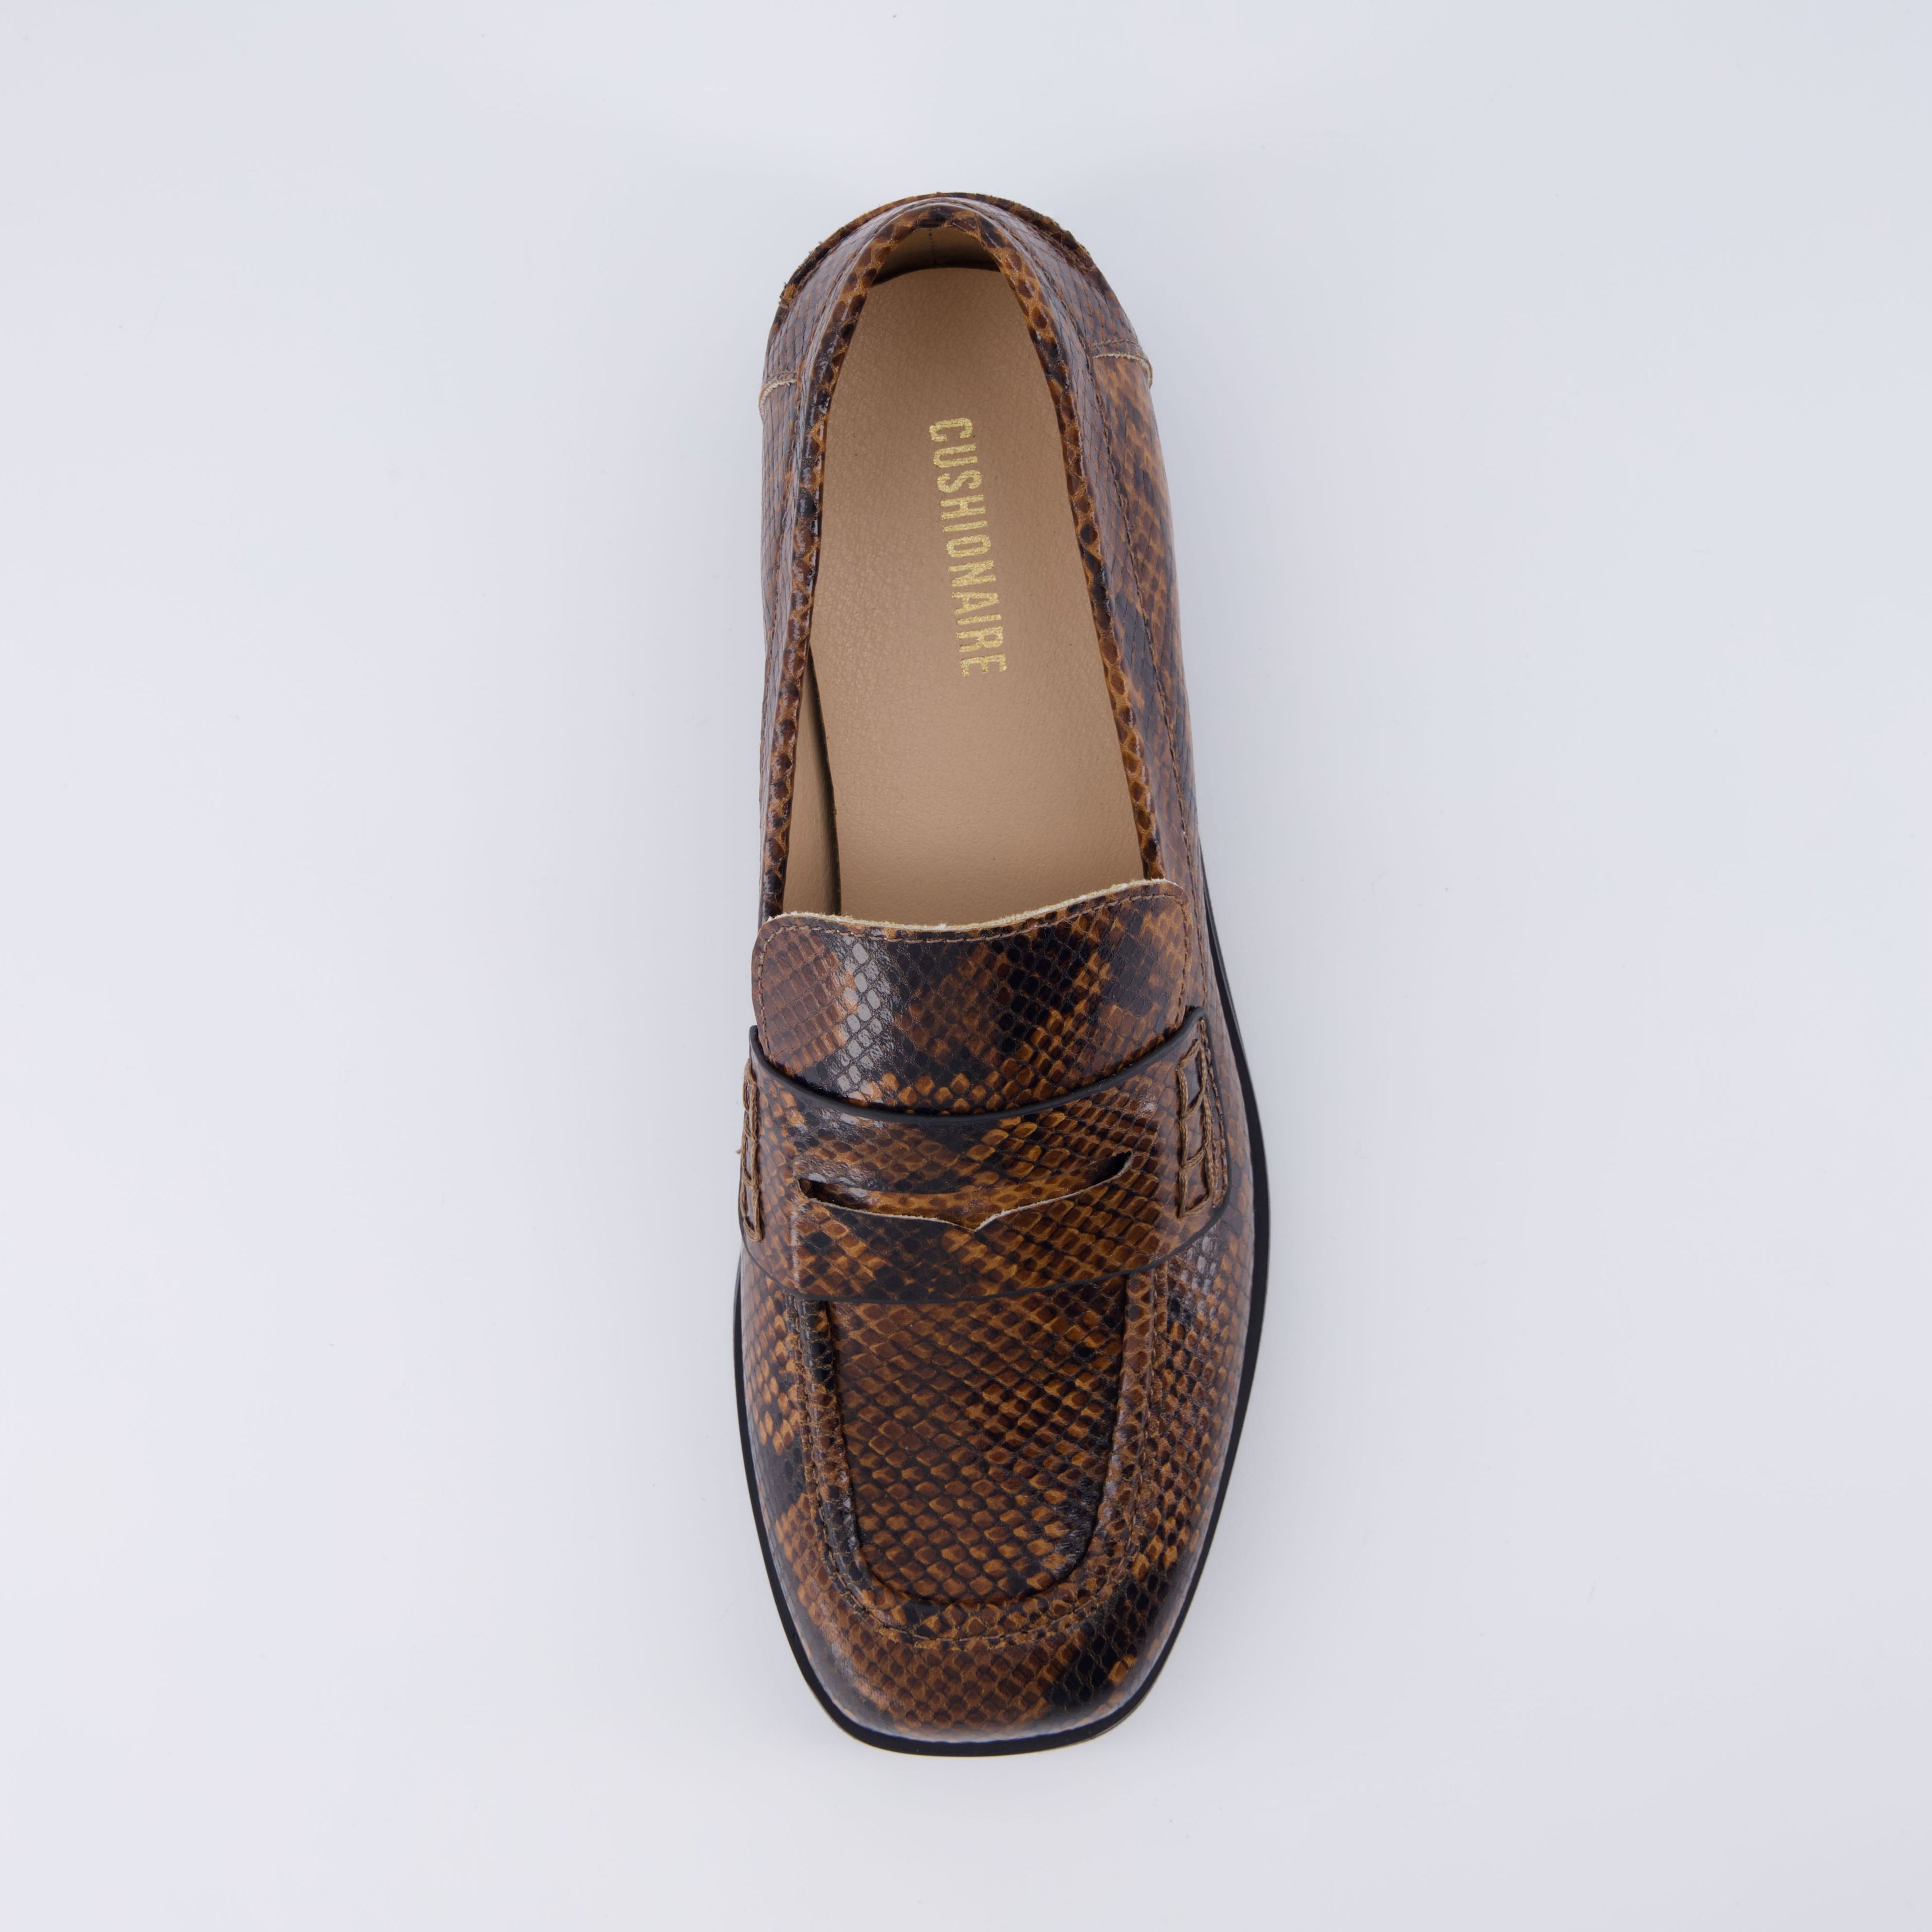 Charade Penny Loafer